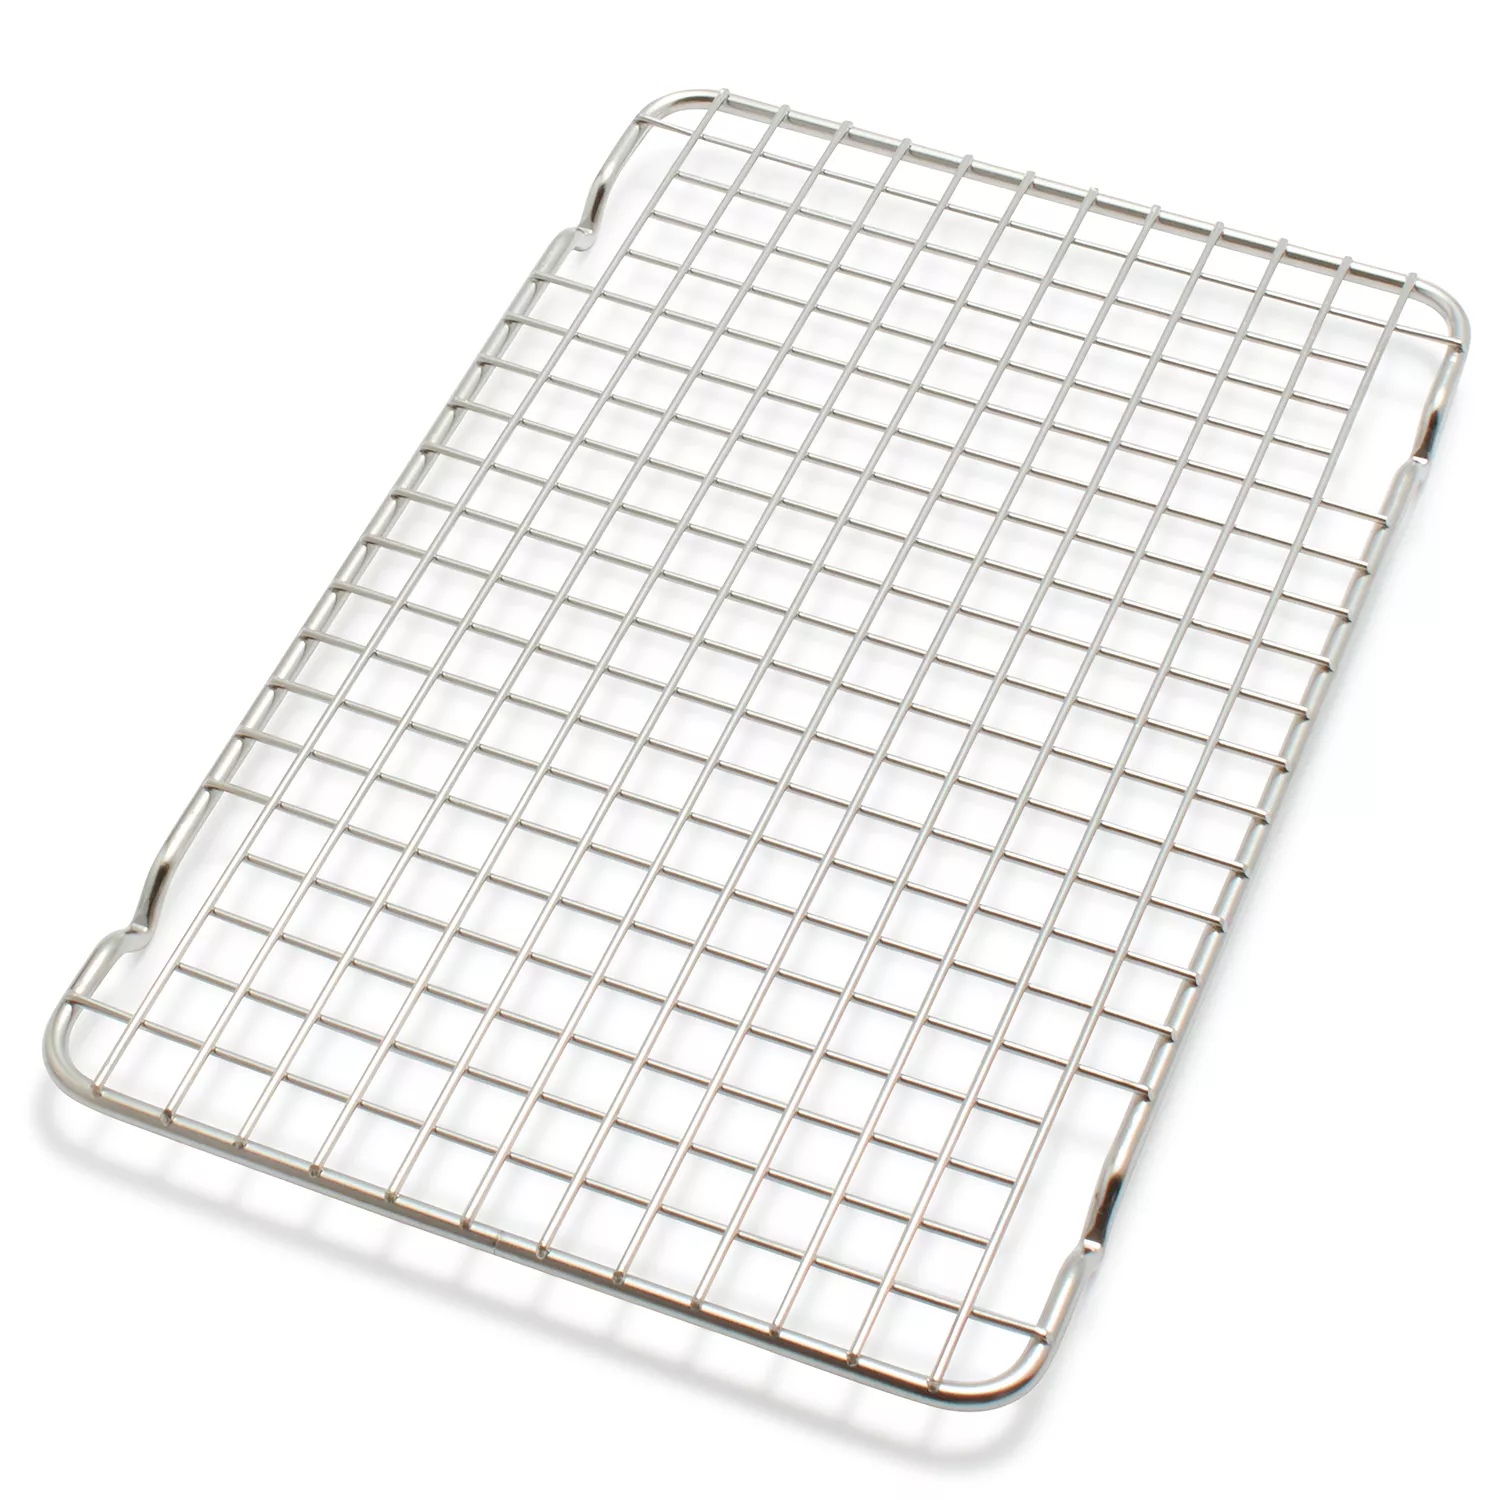 Nordic Ware XL Cooling Grid